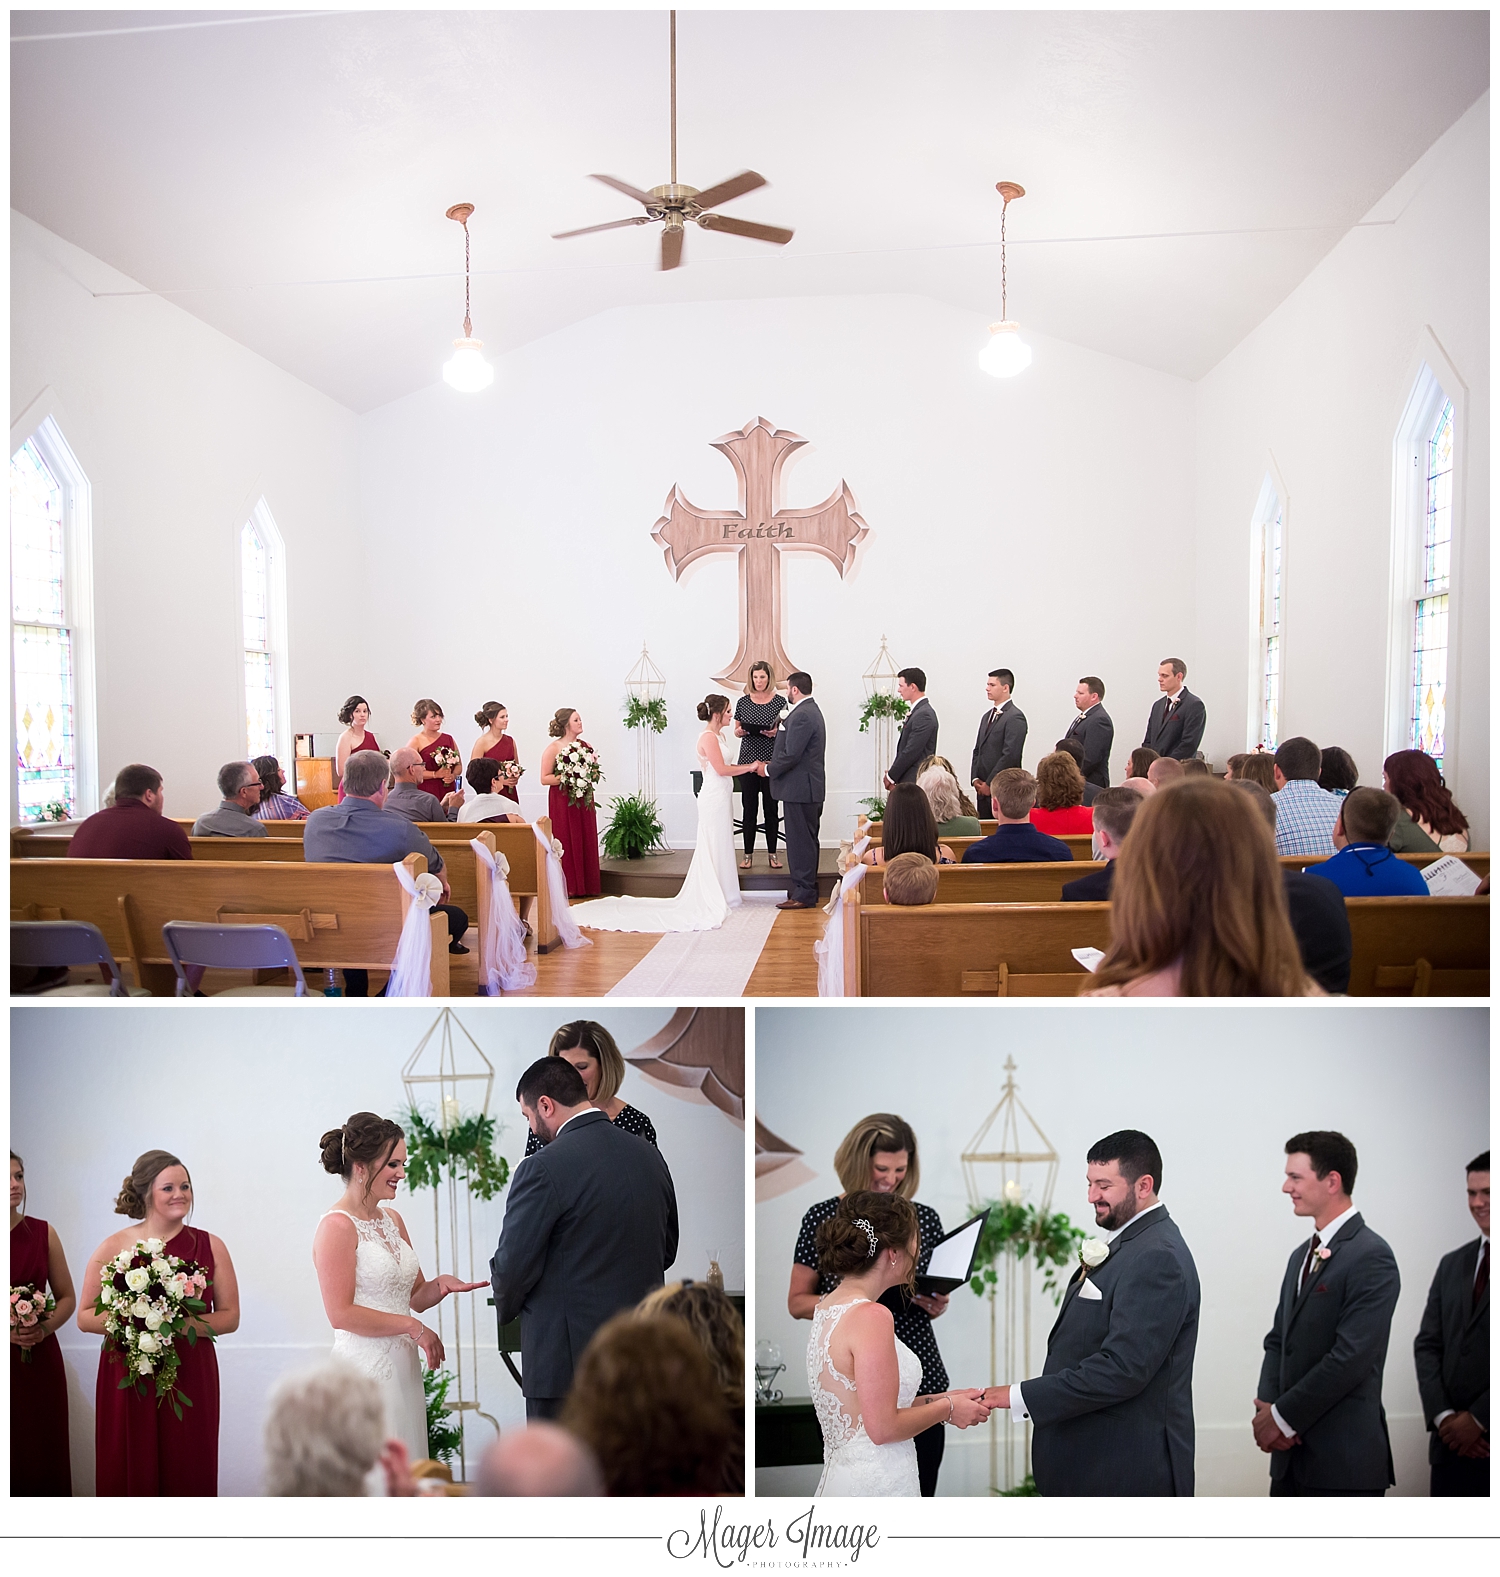 church cross pew guests rings wedding marriage love vows